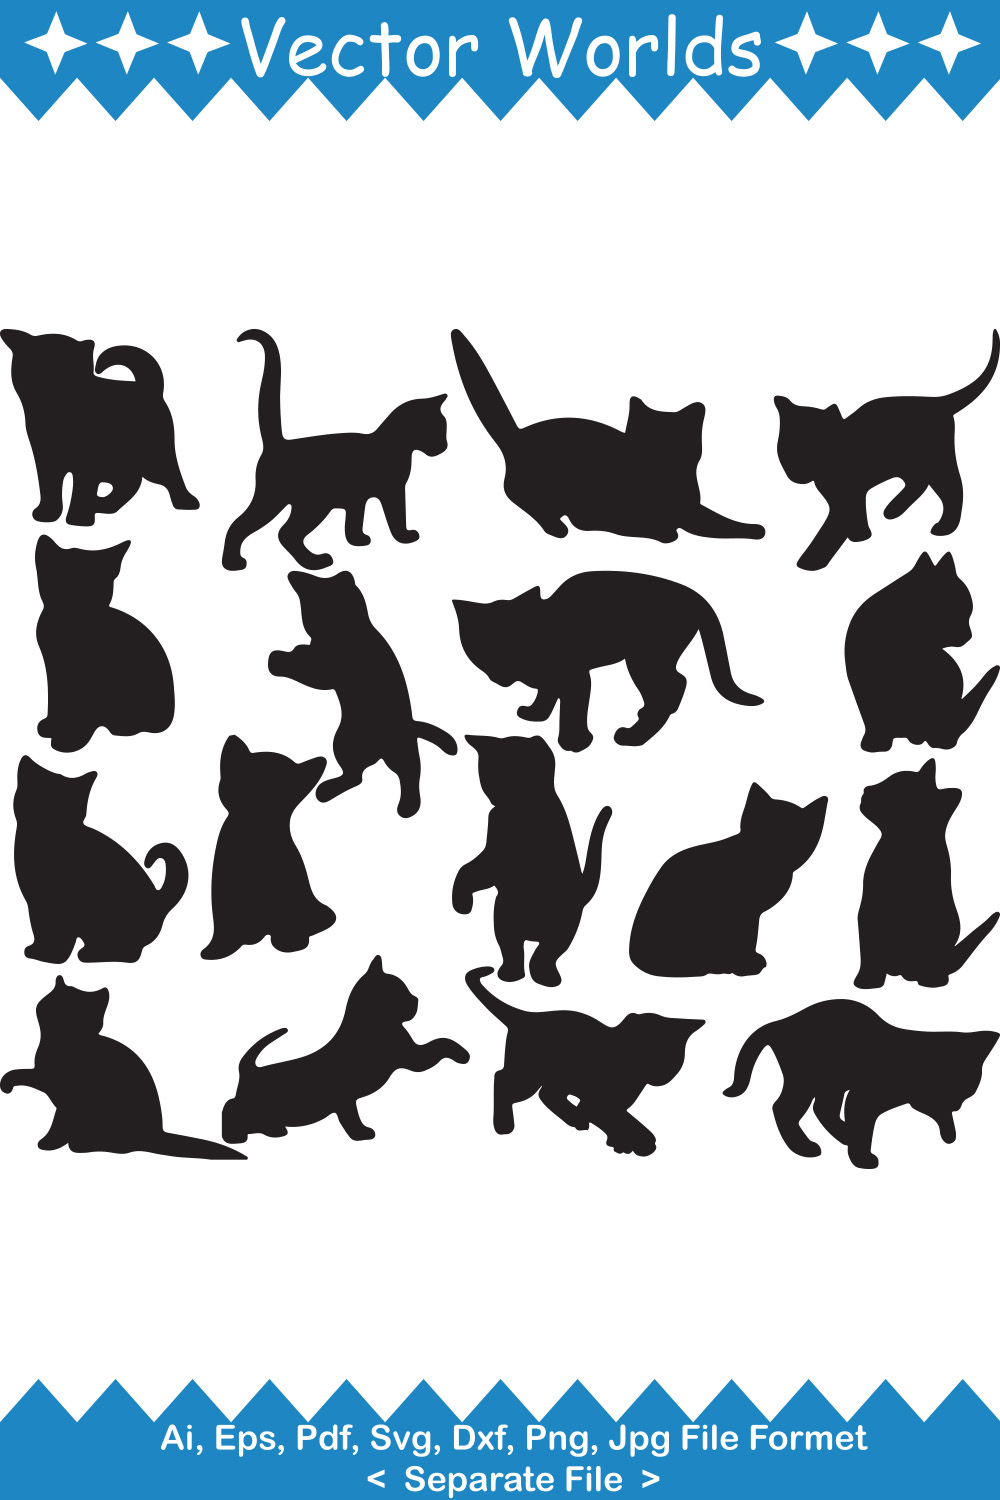 Bunch of cats silhouettes on a white background.